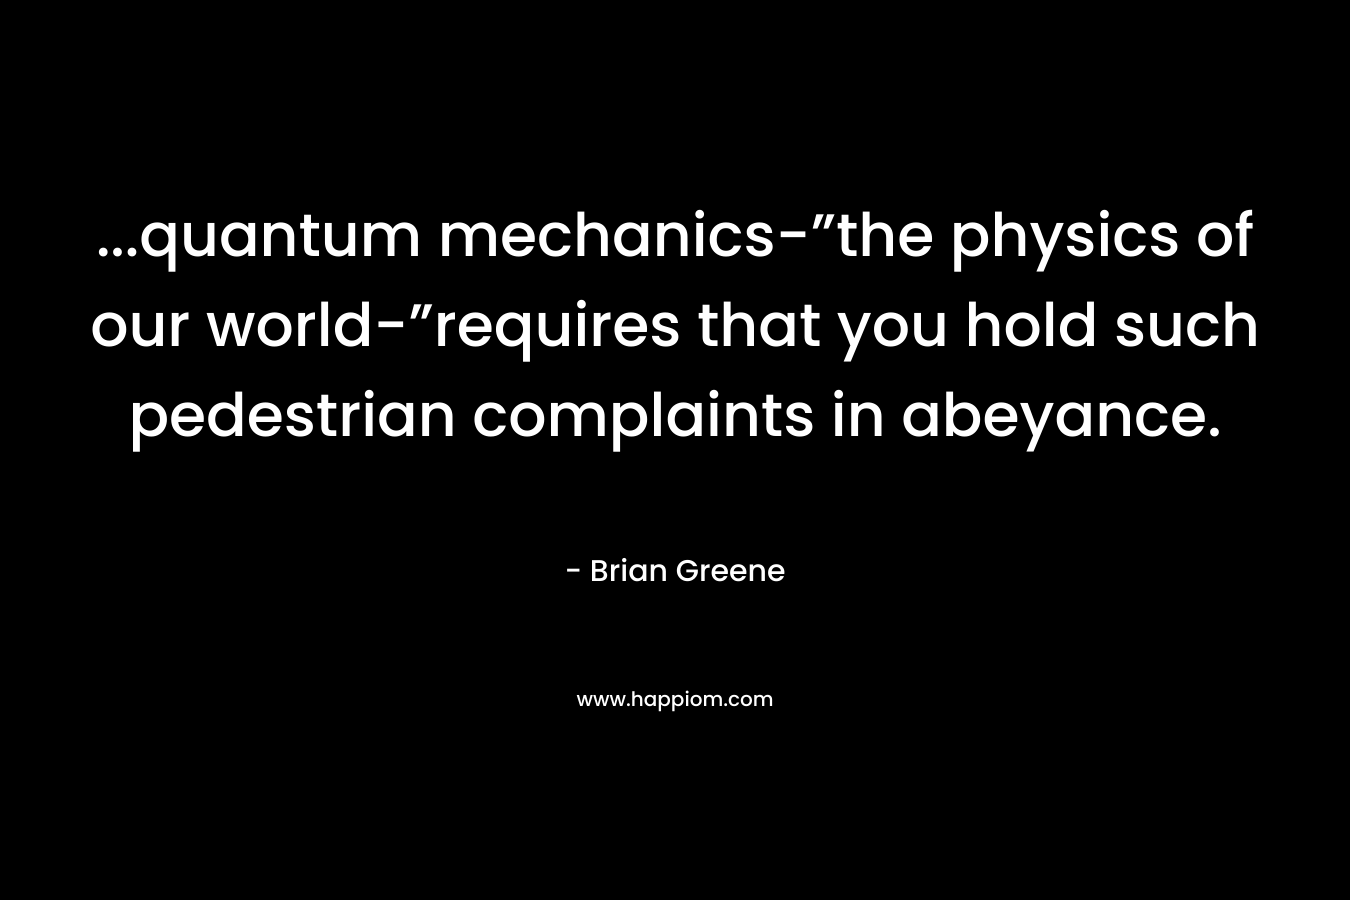 …quantum mechanics-”the physics of our world-”requires that you hold such pedestrian complaints in abeyance. – Brian Greene